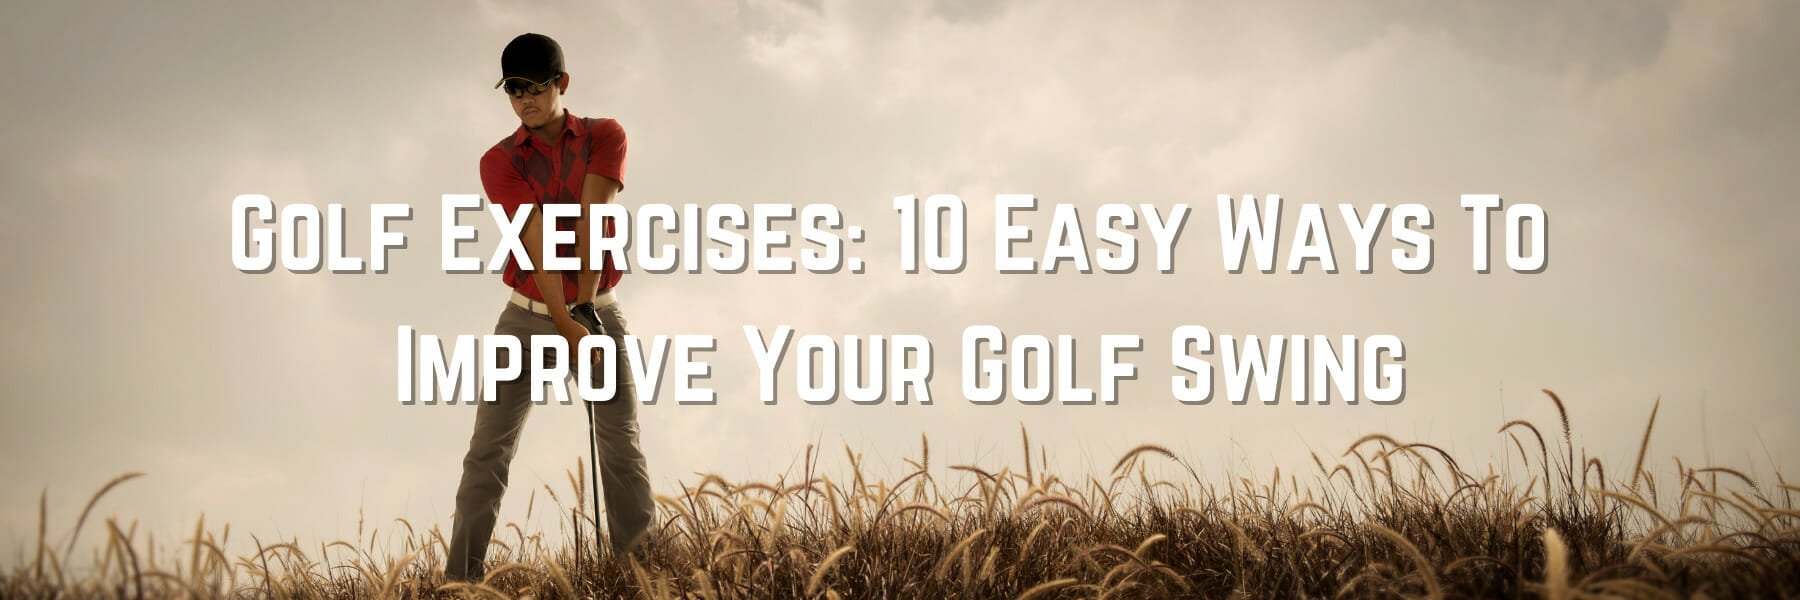 Golf Exercises: 10 Easy Ways To Improve Your Golf Swing